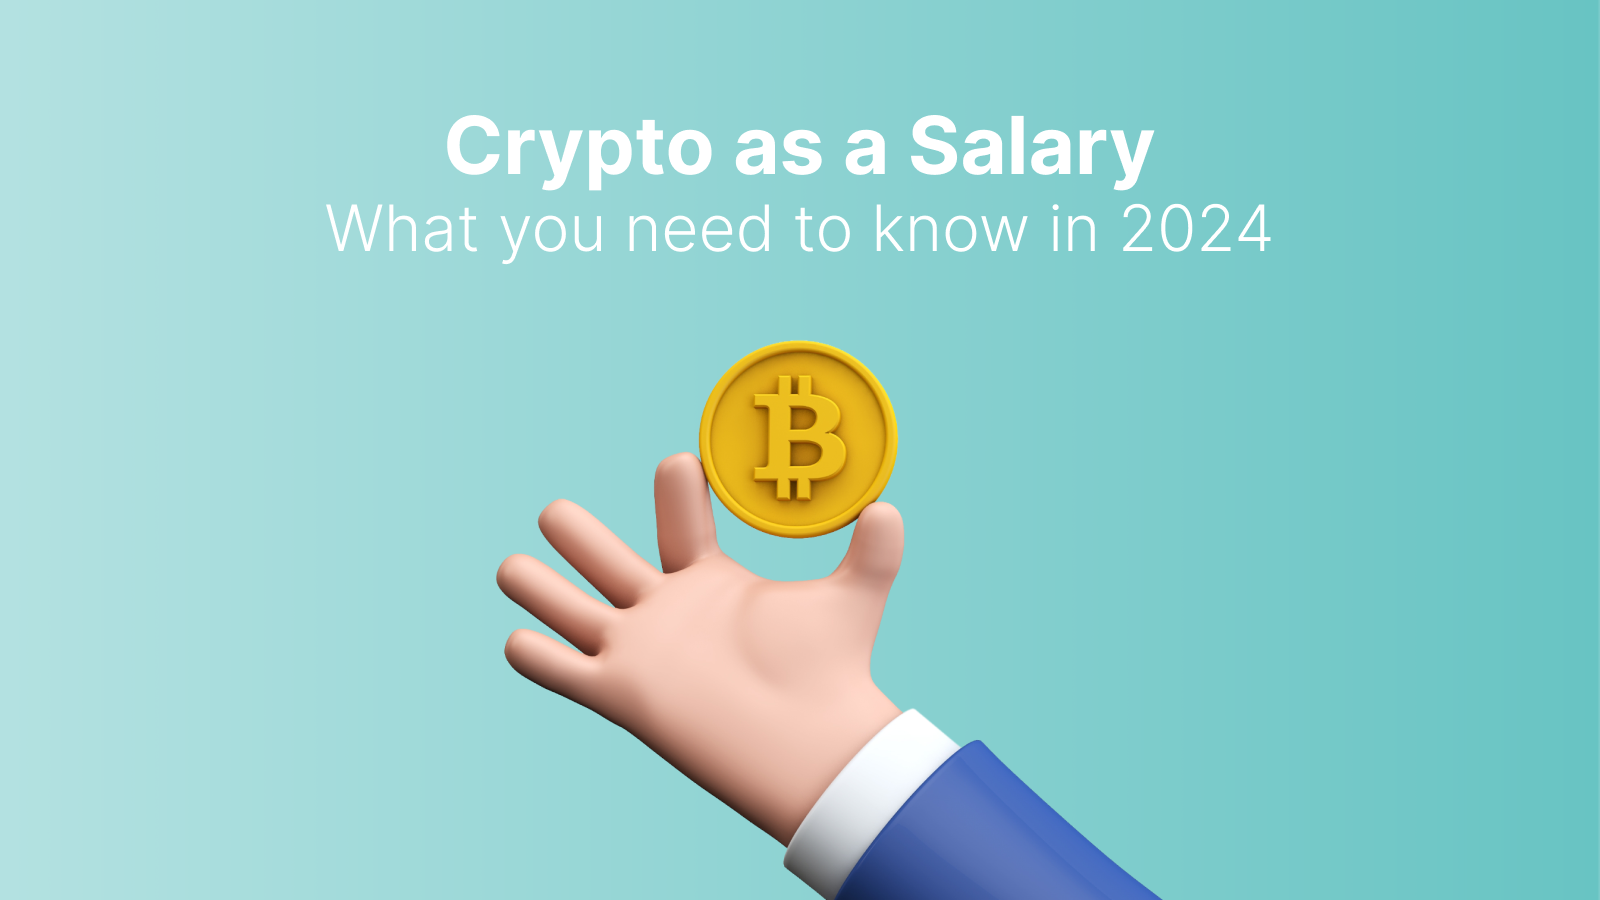 Can Employers Pay Wages in Cryptocurrency?